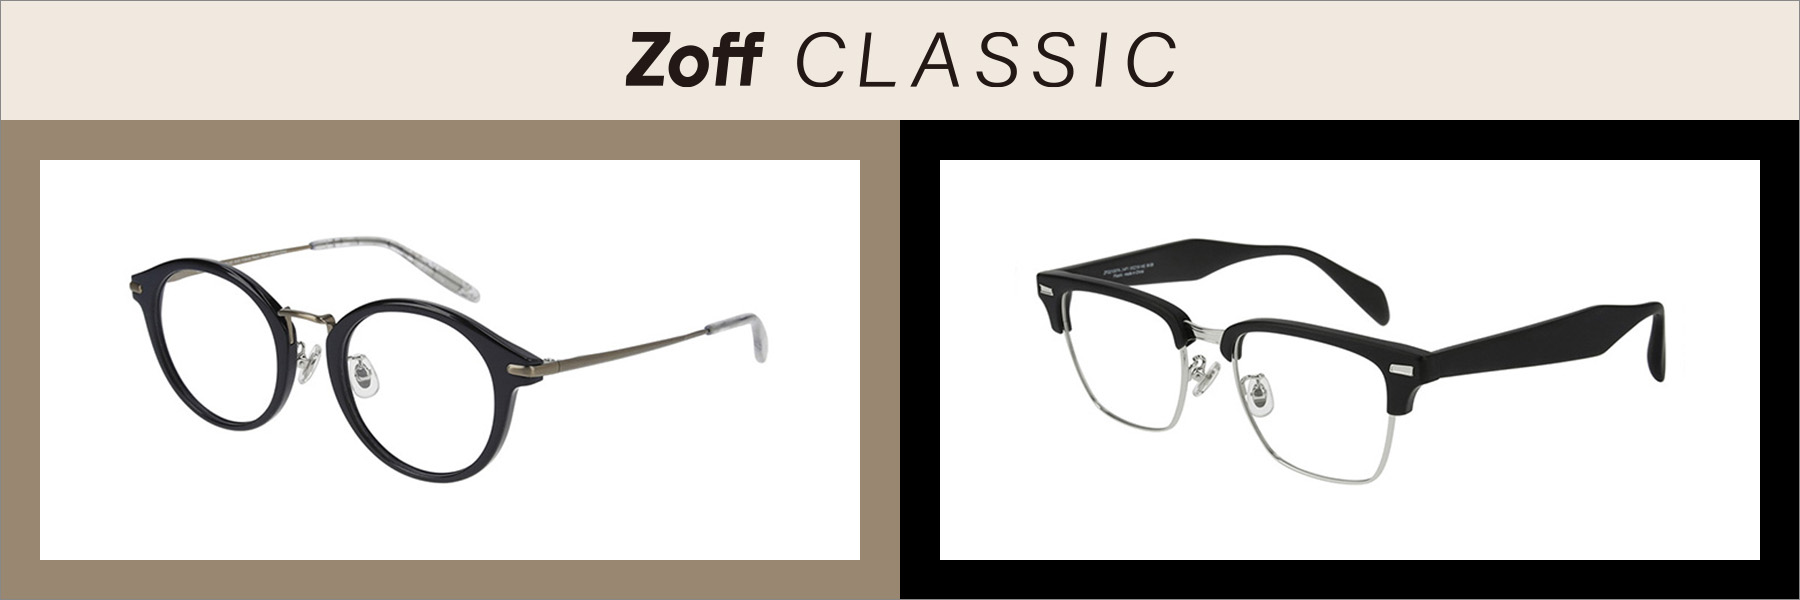 Zoff CLASSIC COLLECTION